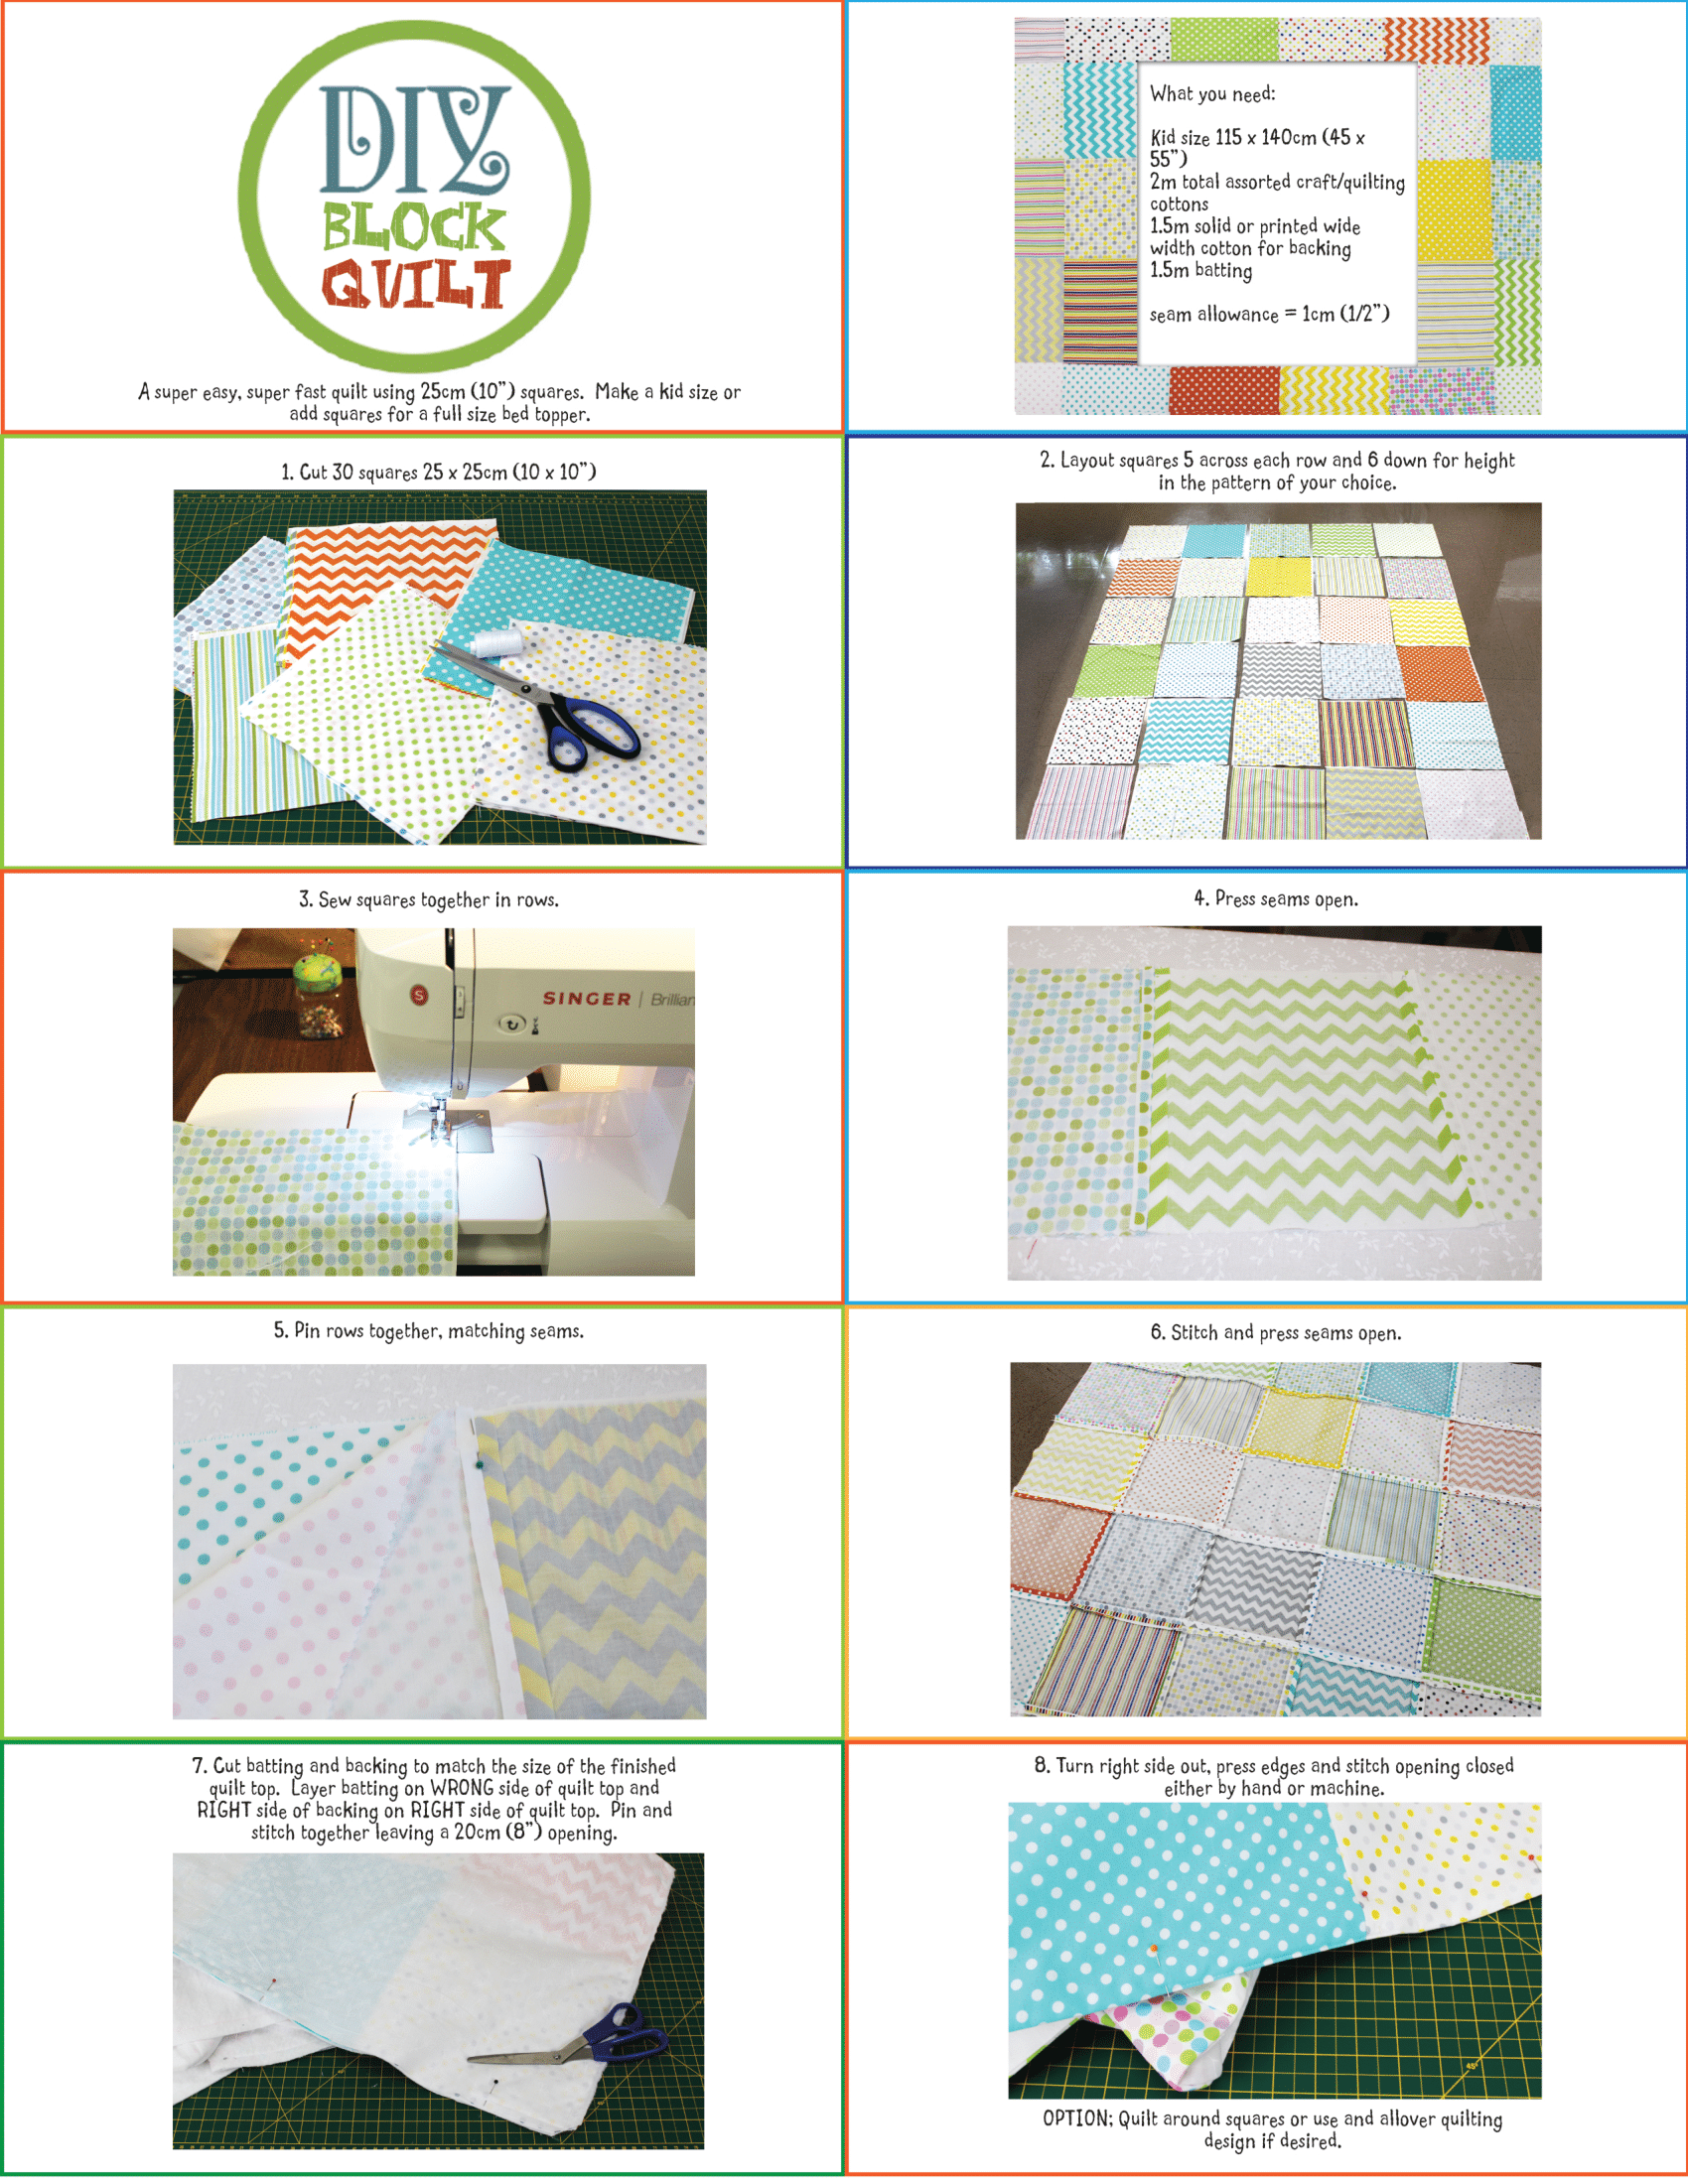 Steps to create your own block quilt.